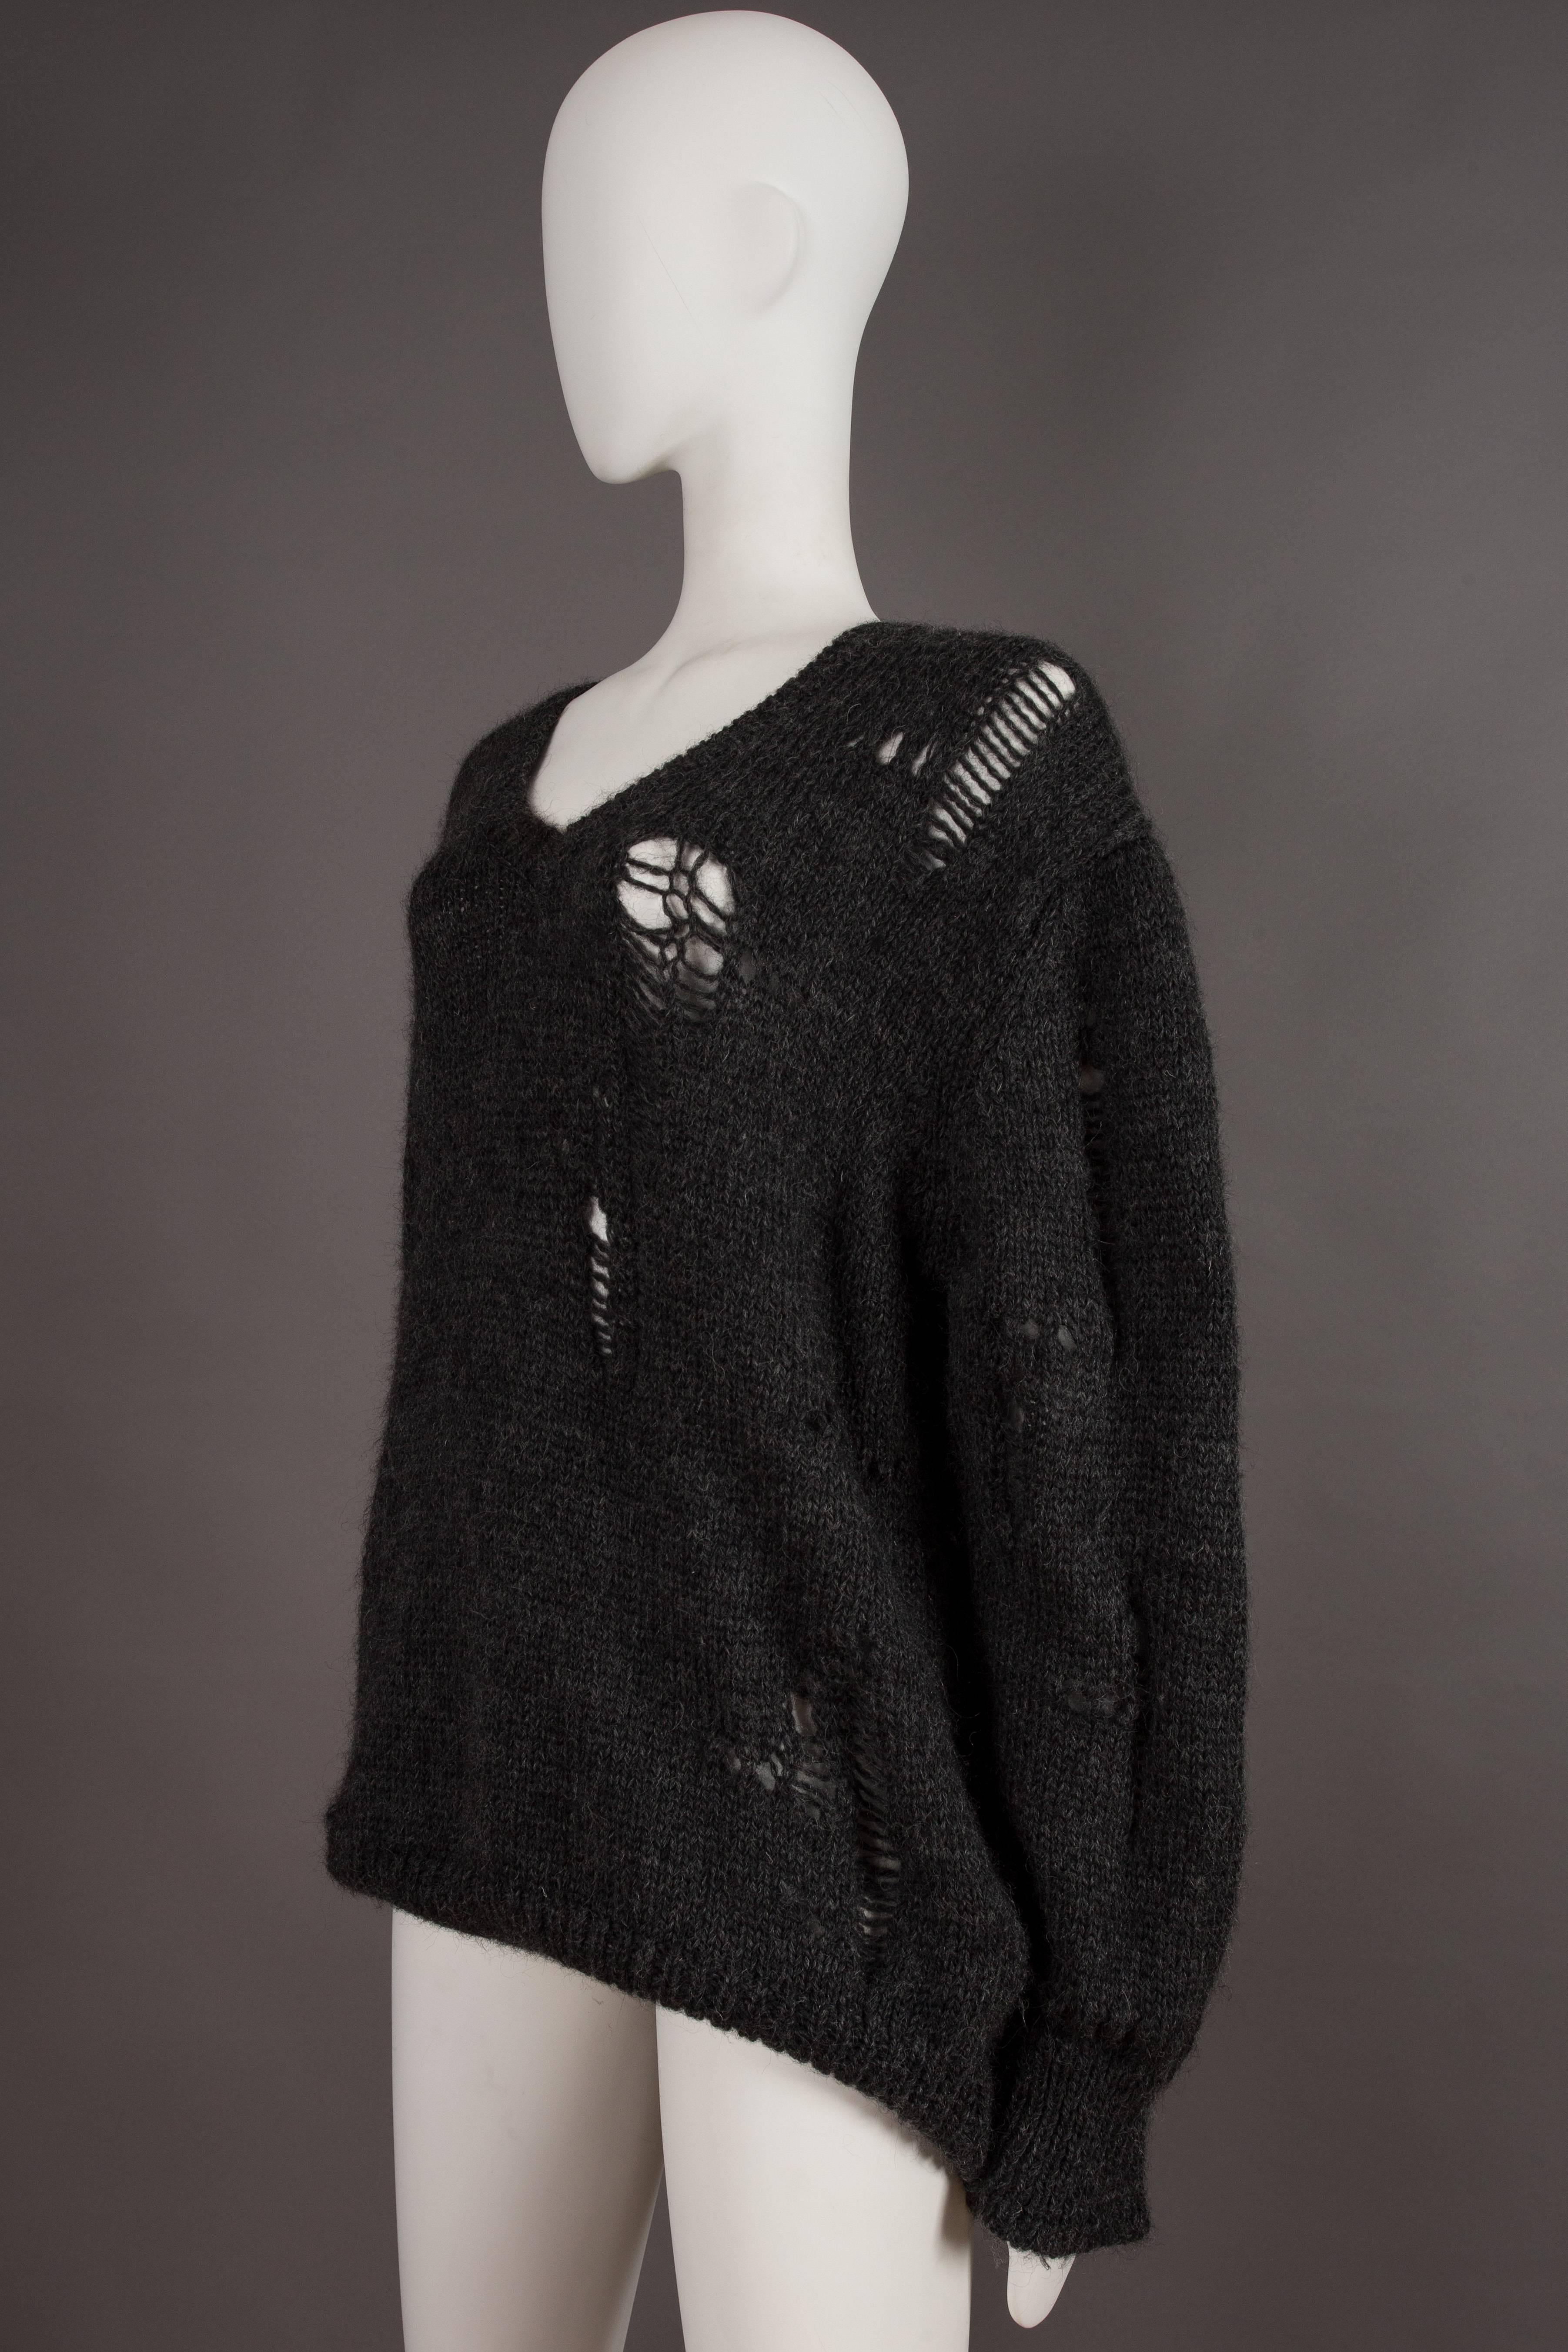 Black Comme des Garcons oversized sweater decorated with holes, circa 1982